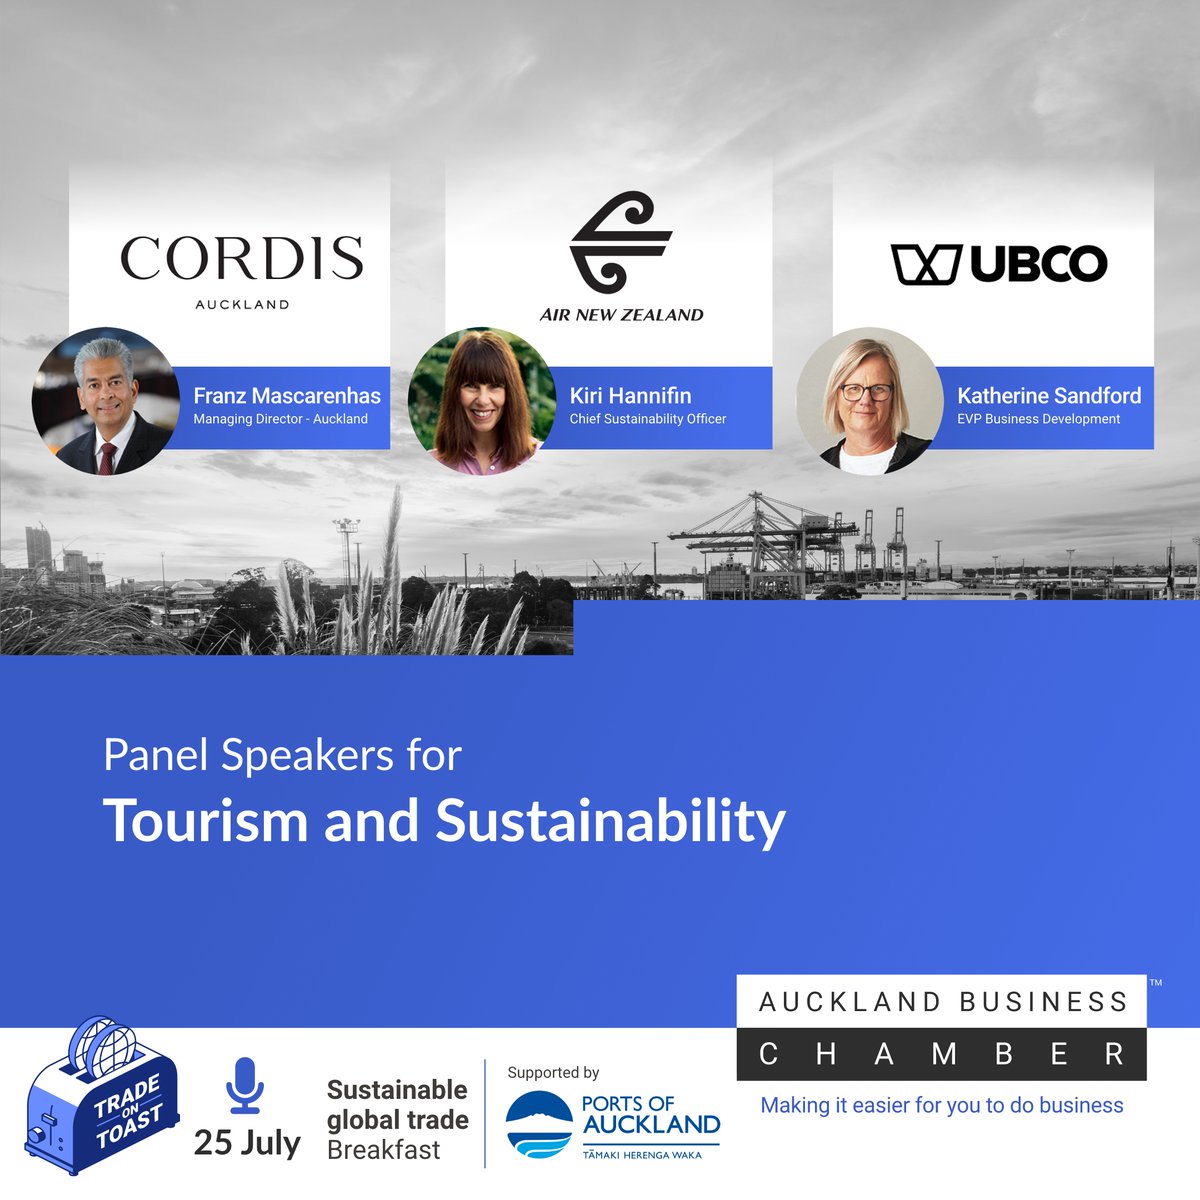 Introducing the second panel of speakers for our next Trade on Toast event series. This panel's topic is Tourism and Sustainability, focusing on the intersection of these crucial areas. Visit the event website to learn more here: hubs.li/Q01WldBK0